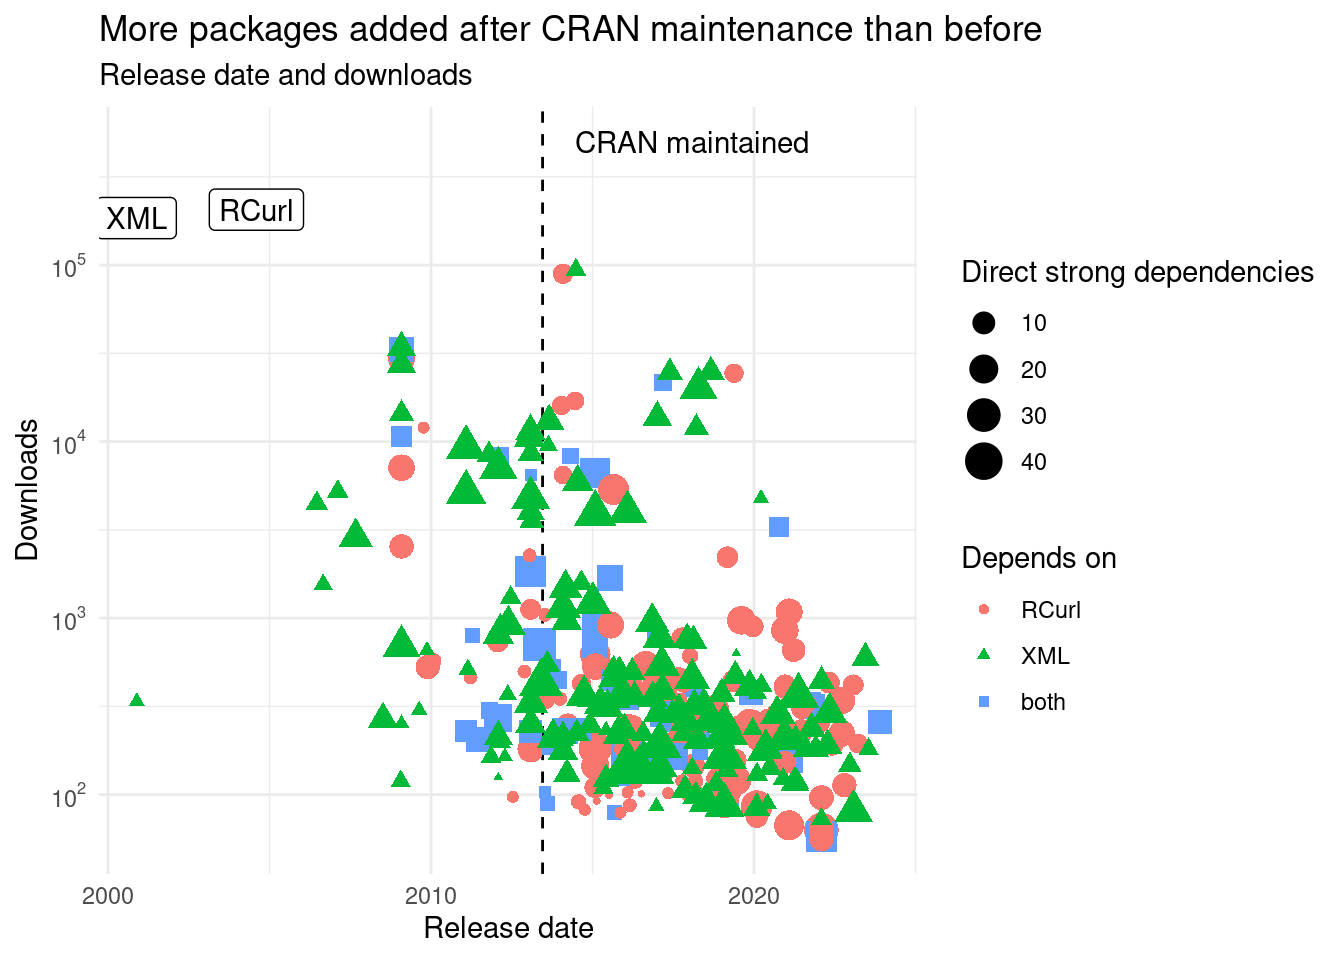 First release of packages in relation to the maintenance by CRAN of XML and RCurl.